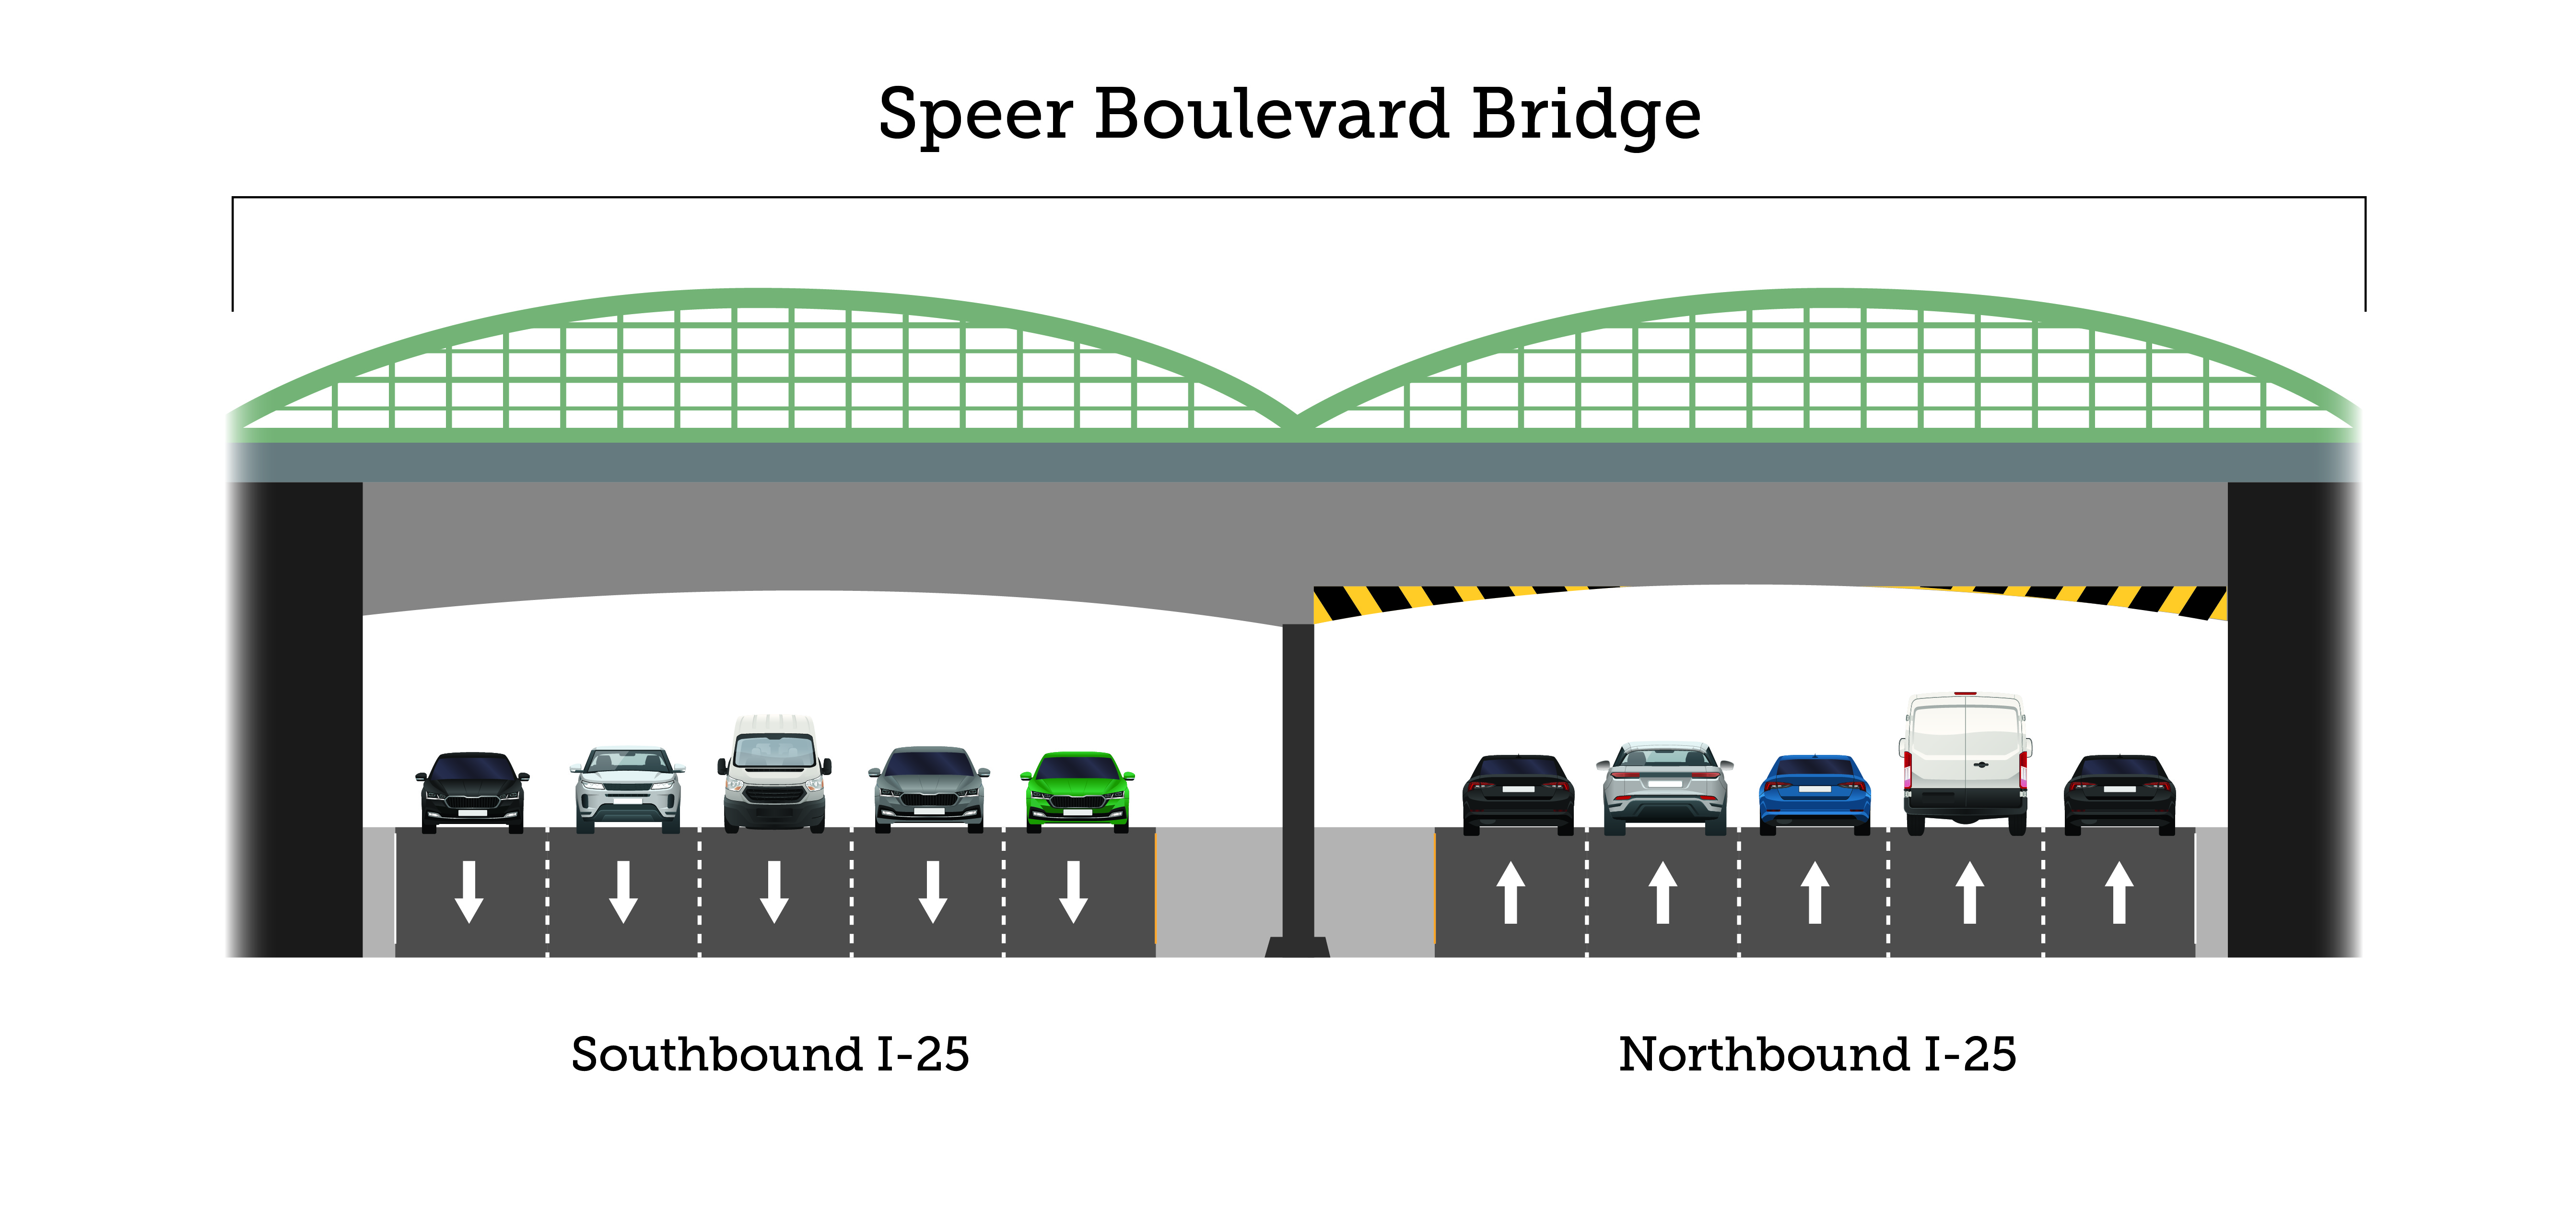 Speer Boulevard Bridge Cross Section north and southbound I-25 graphic.jpg detail image